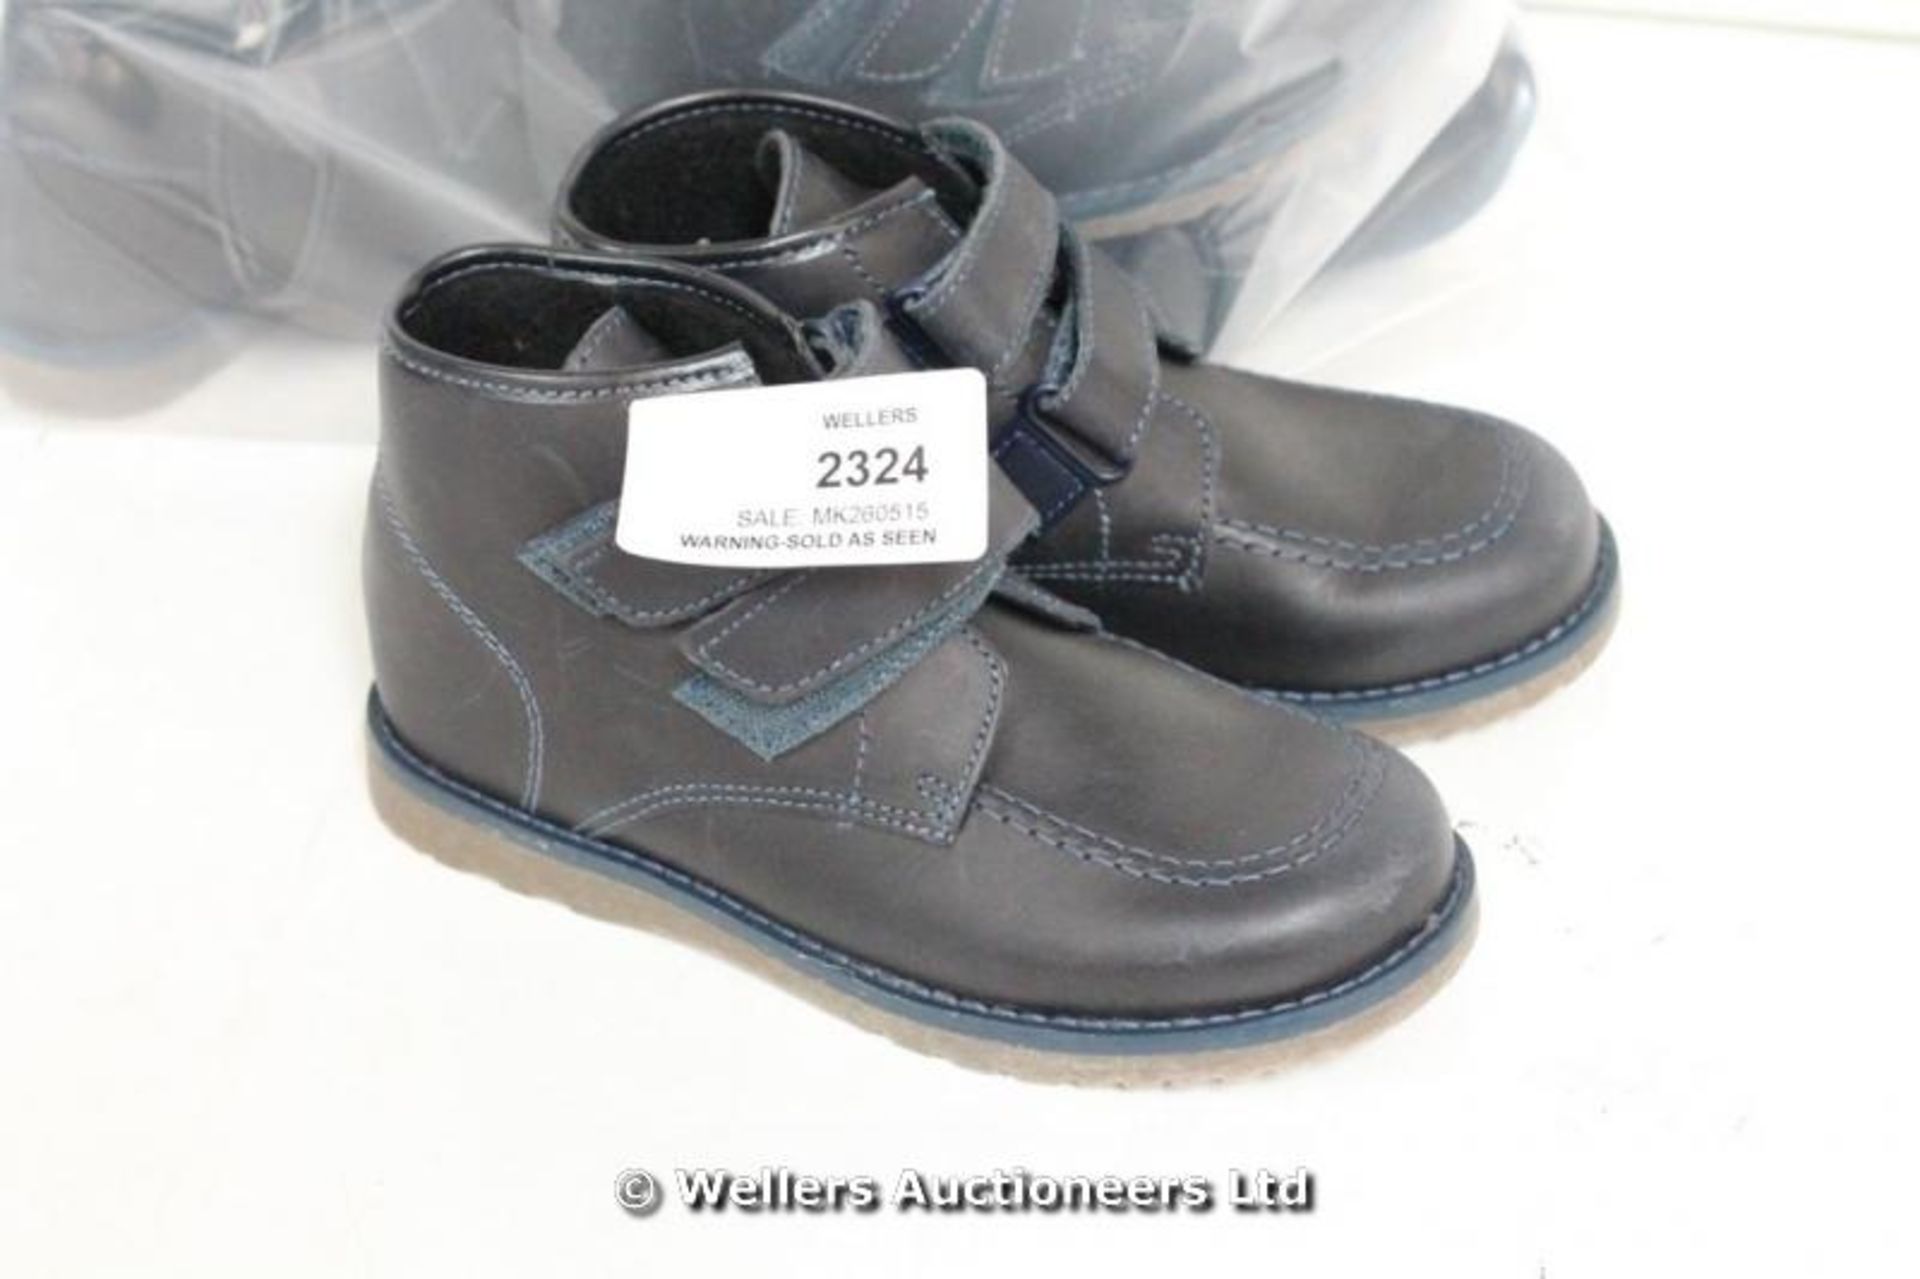 X4 MIXED CHILDRENS DAVID DOUBLE VELCRO NAVY LEATHER ANKLE BOOTS INC SIZE 31, 27,25 / GRADE: NEW /